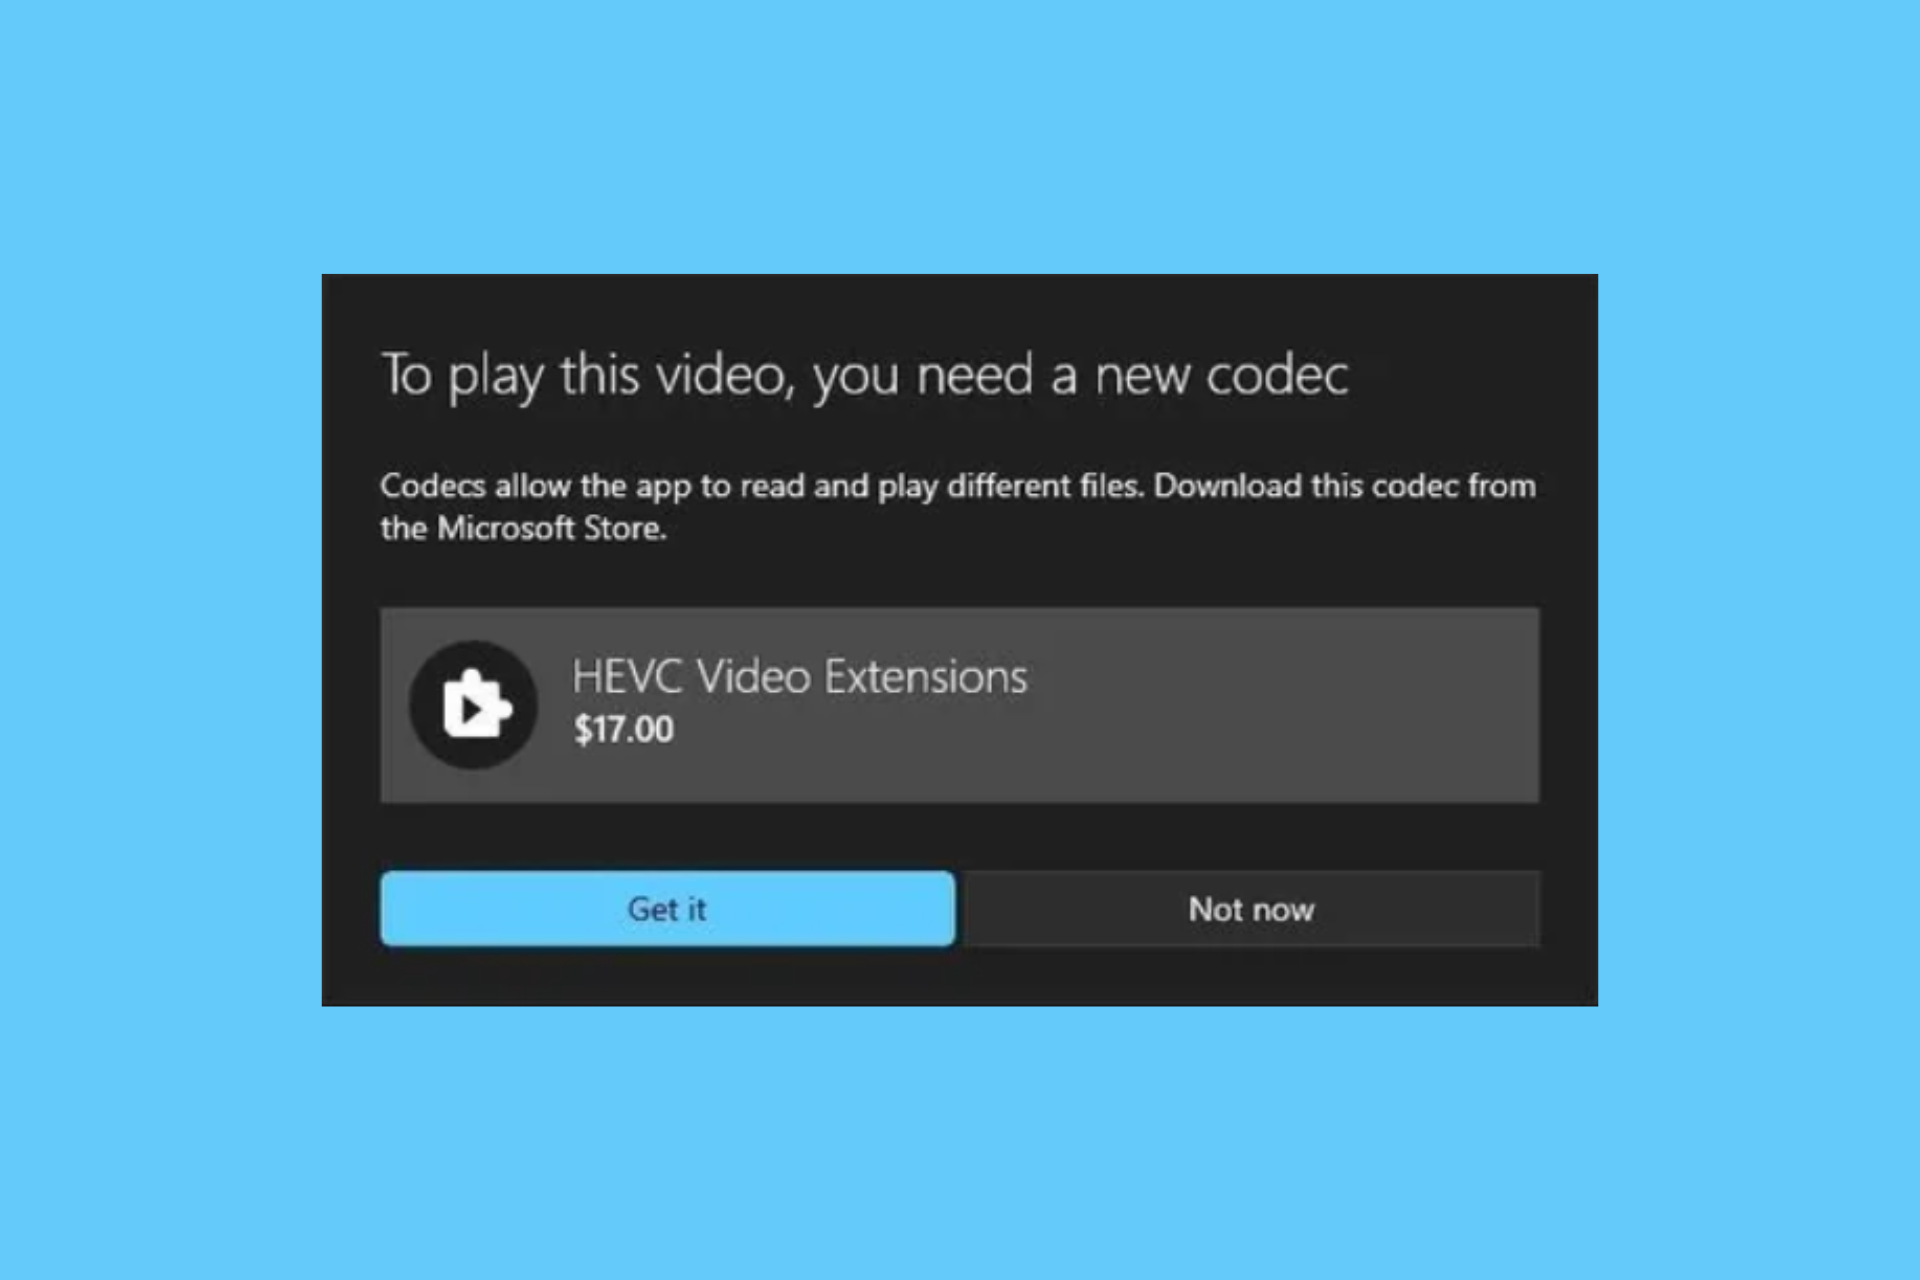 Don't pay for the HEVC video extension